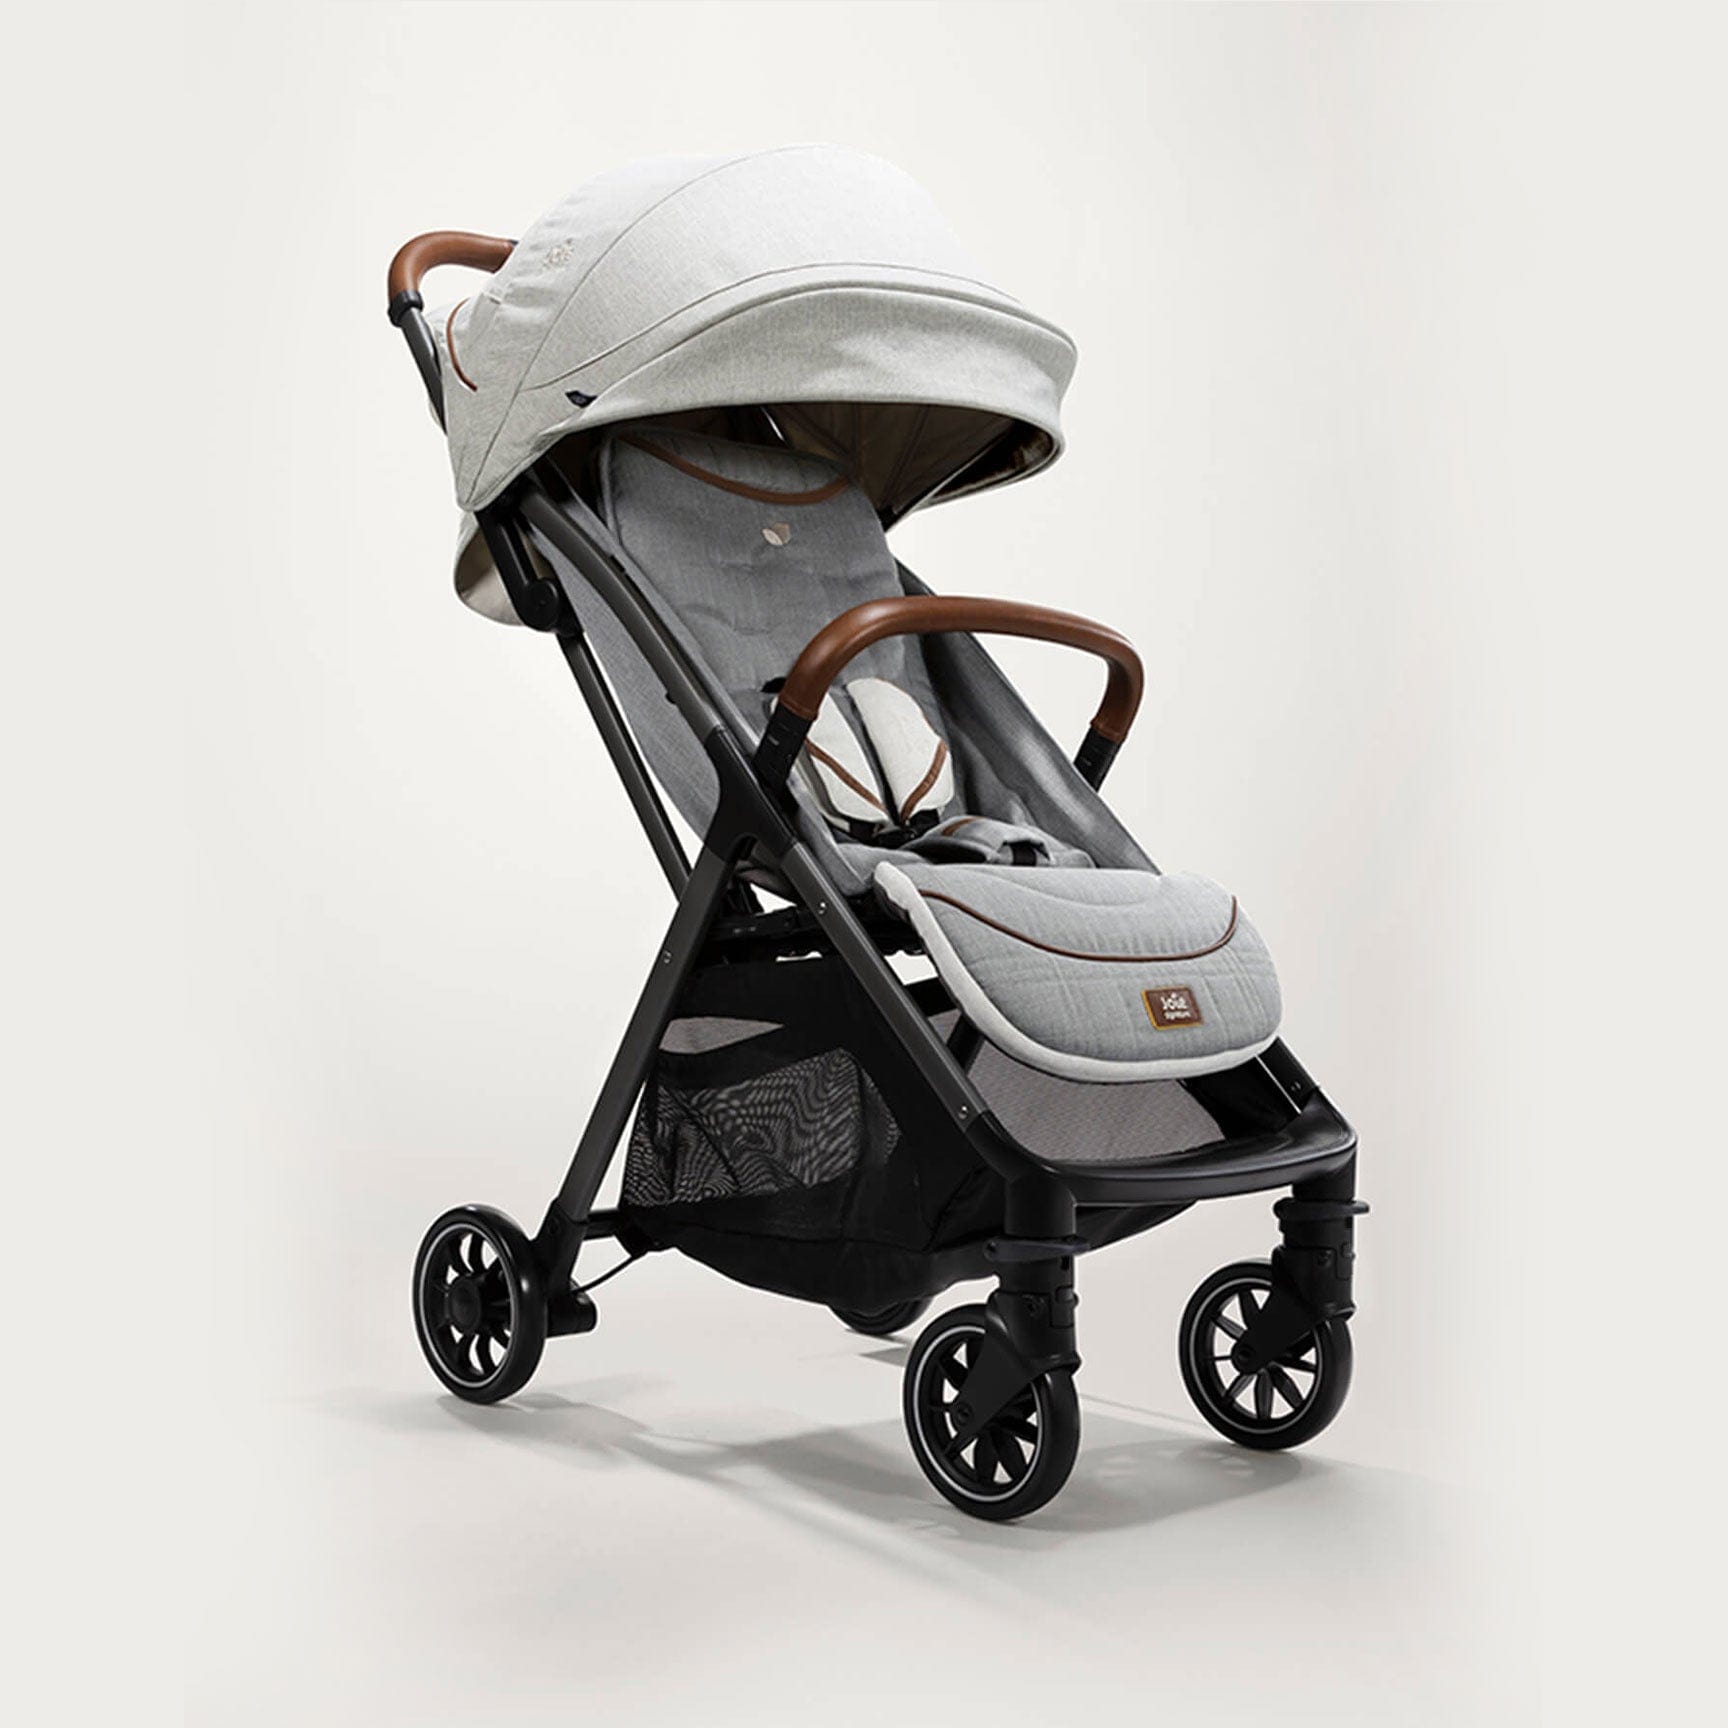 Joie Parcel Signature Stroller in Oyster Pushchairs & Buggies S2112AAOYS000